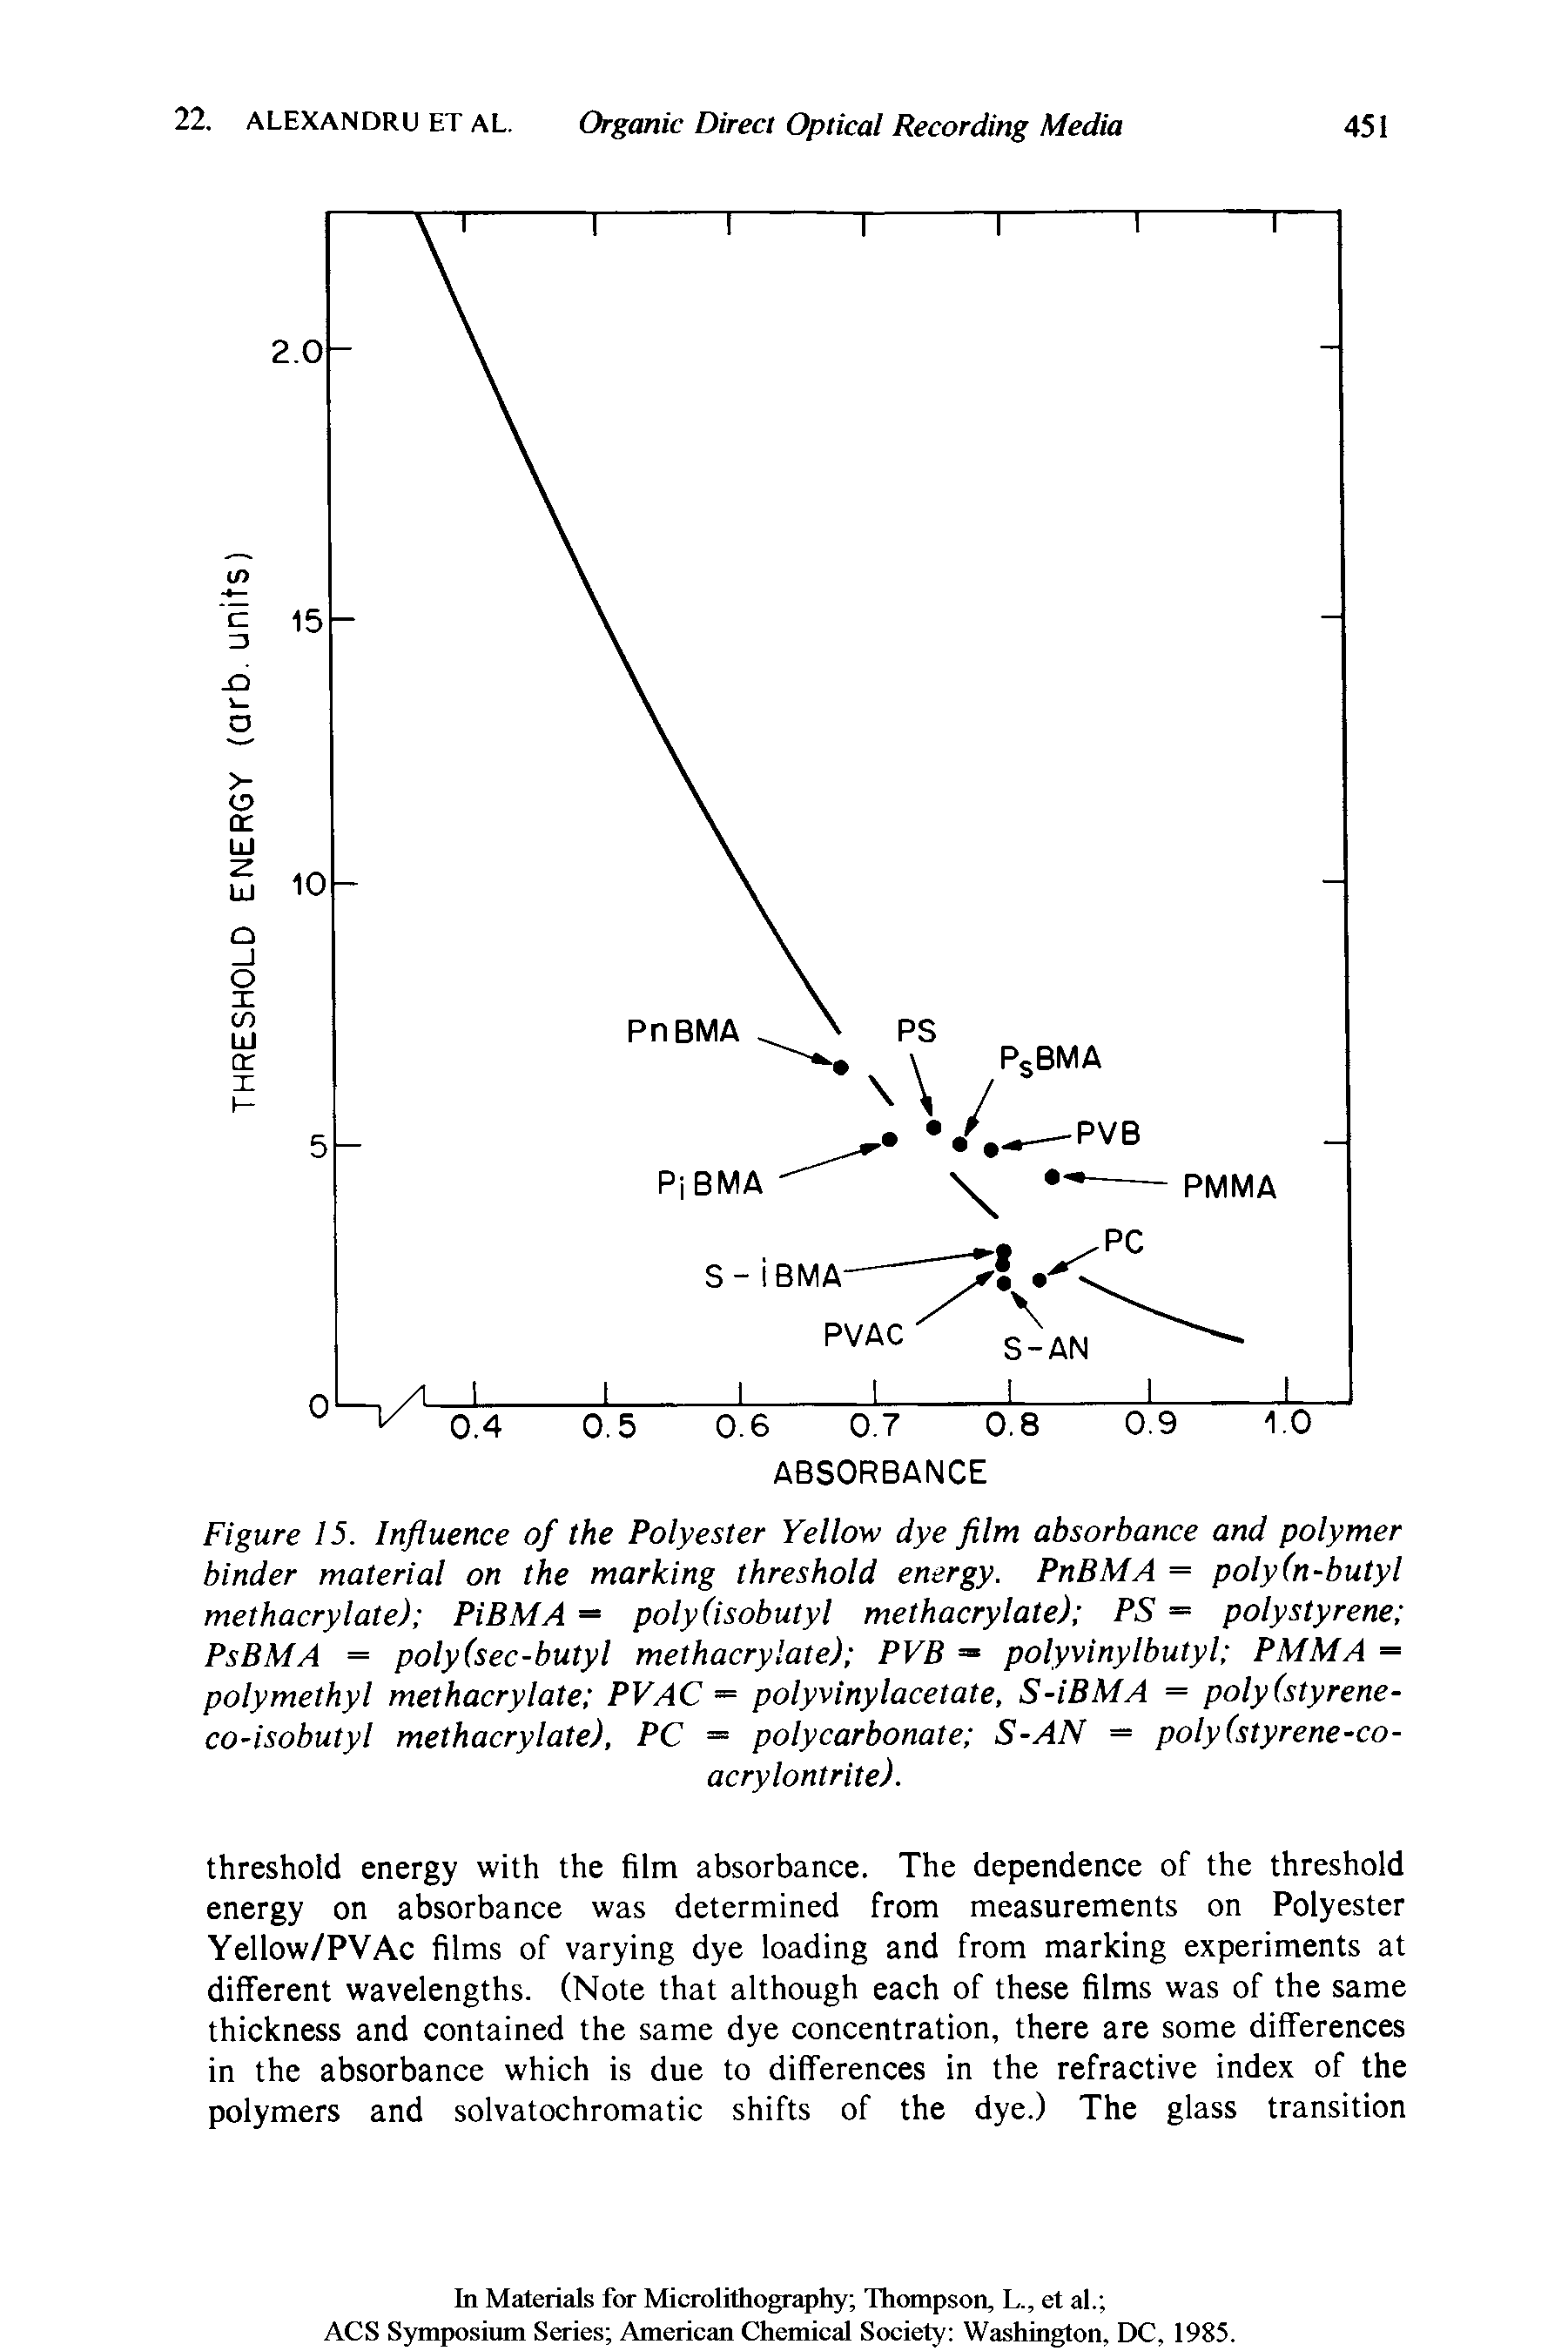 Figure 15. Influence of the Polyester Yellow dye film absorbance and polymer binder material on the marking threshold energy. PnBMA = poly(n-butyl methacrylate) PiBMA = poly(isobutyl methacrylate) PS = polystyrene PsBMA = poly (sec-butyl methacrylate) PVB = polyvinylbutyl PMMA = polymethyl methacrylate PVAC = polyvinylacetate, S-iBMA = poly(styrene-co-isobutyl methacrylate), PC = polycarbonate S-AN — poly(styrene-co-...